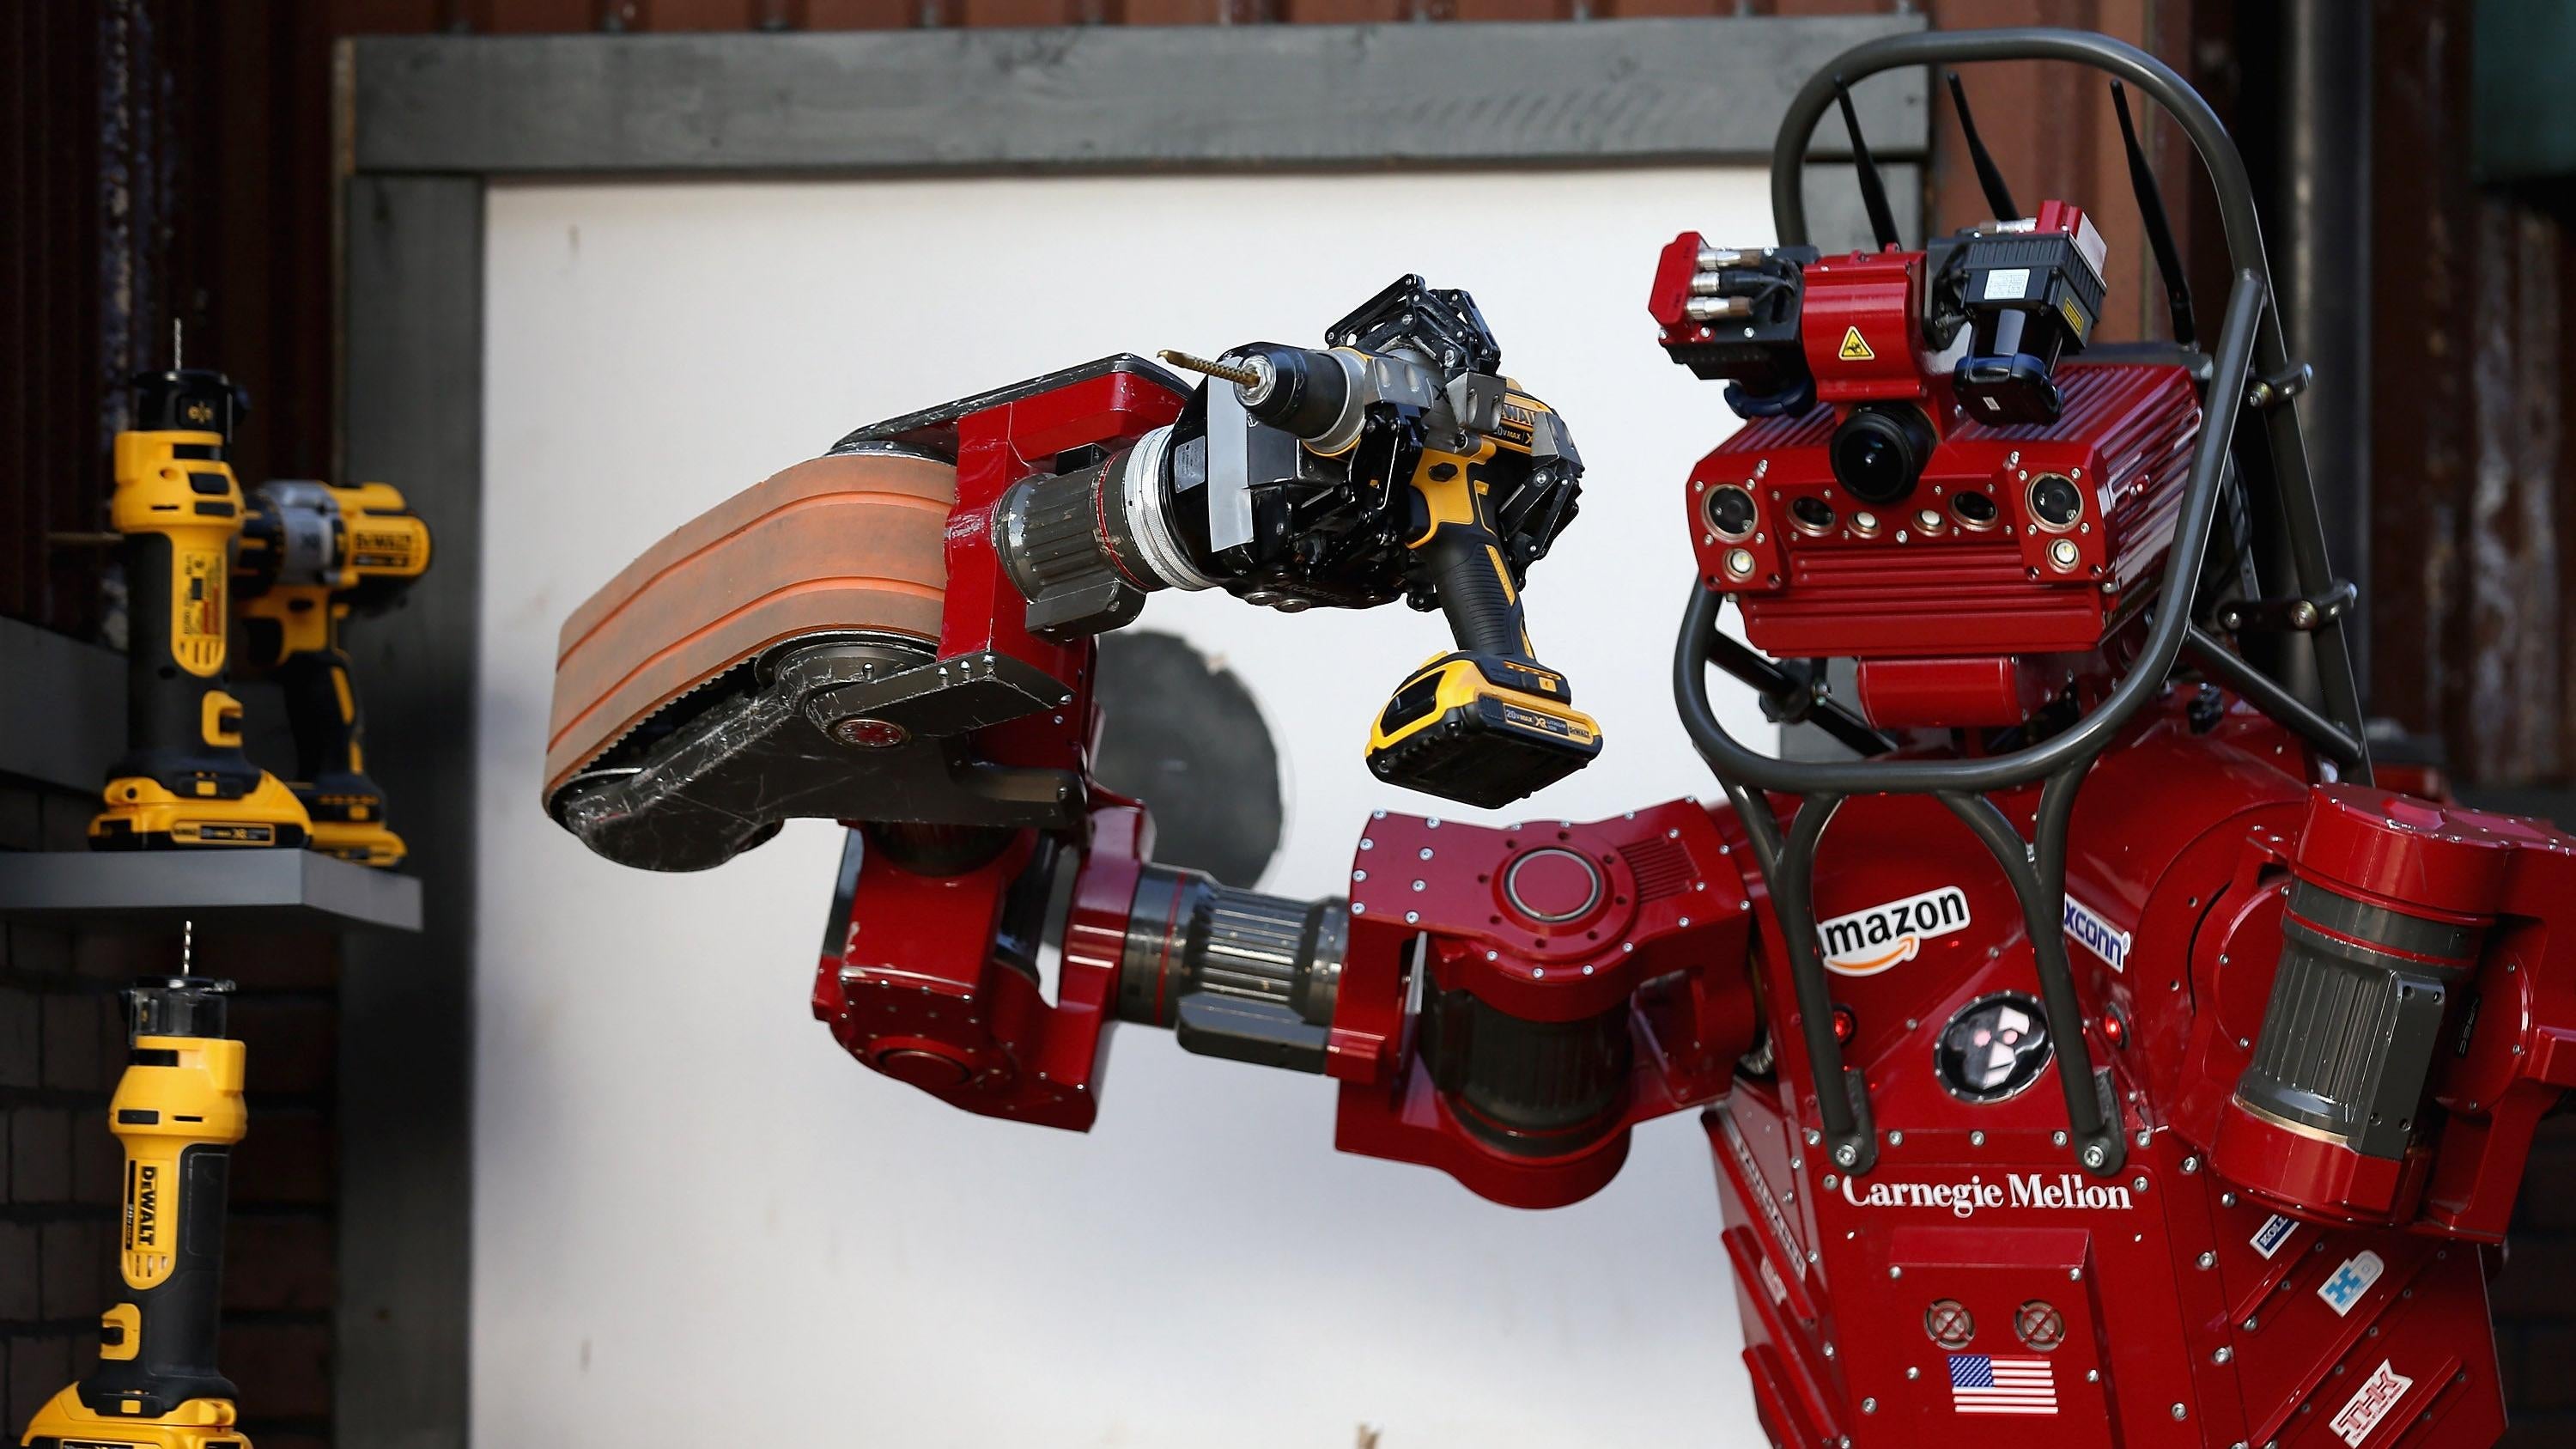 Team Tartan Rescue's CHIMP (CMU Highly Intelligent Mobile Platform) robot uses a hand-held power tool during the cutting task of the Defence Advanced Research Projects Agency (DARPA) Robotics Challenge at the Fairplex June 6, 2015 in Pomona, California. (Photo: Chip Somodevilla, Getty Images)